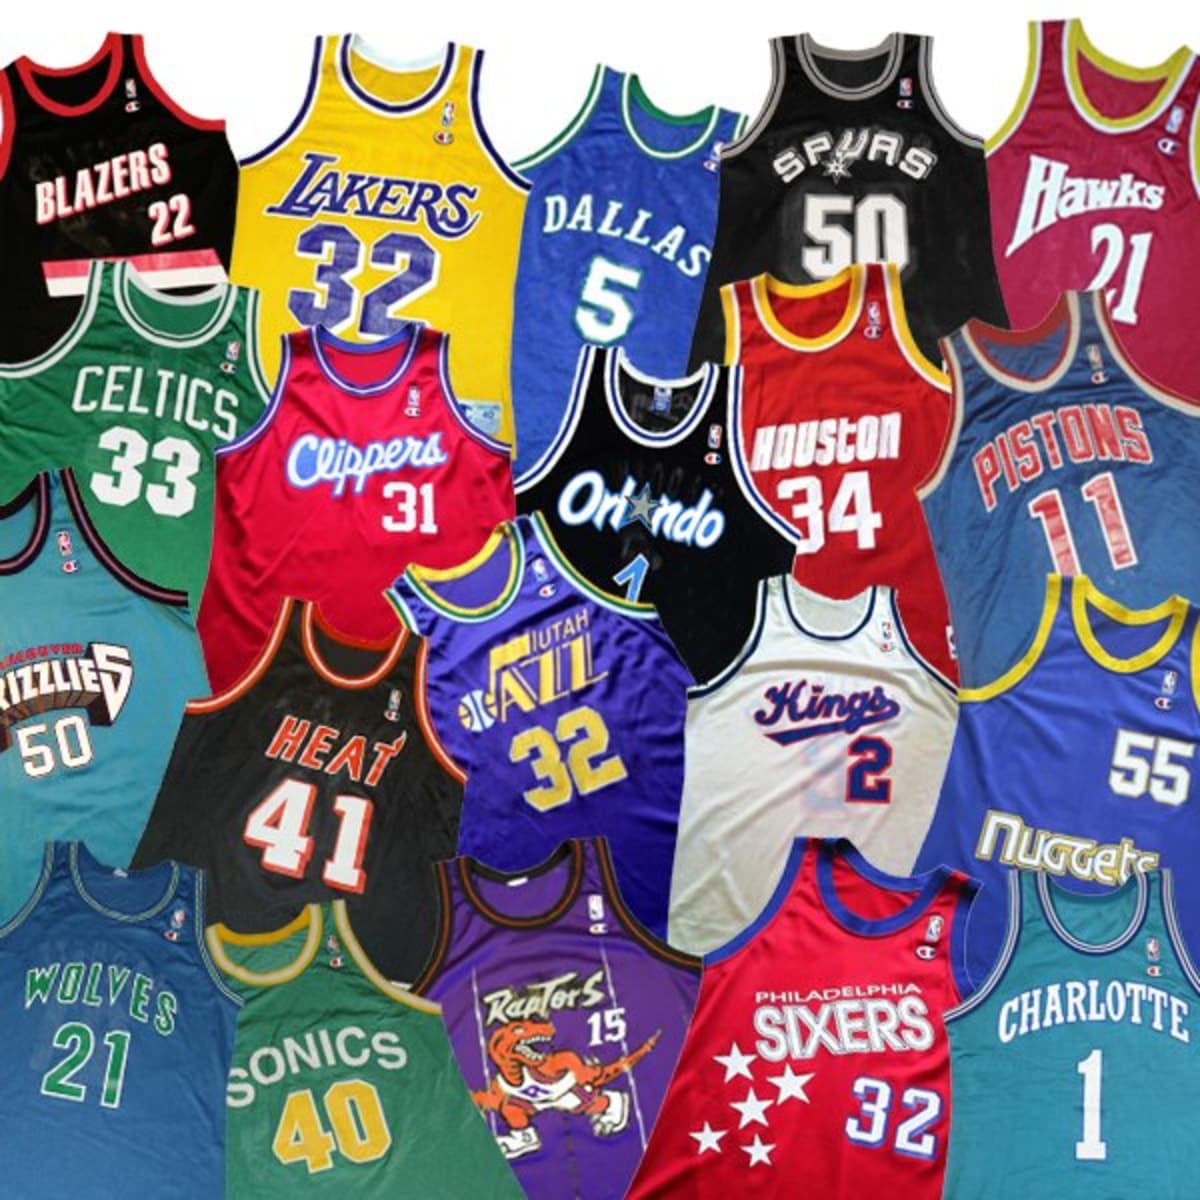 The 10 best NBA jerseys of the 1990s